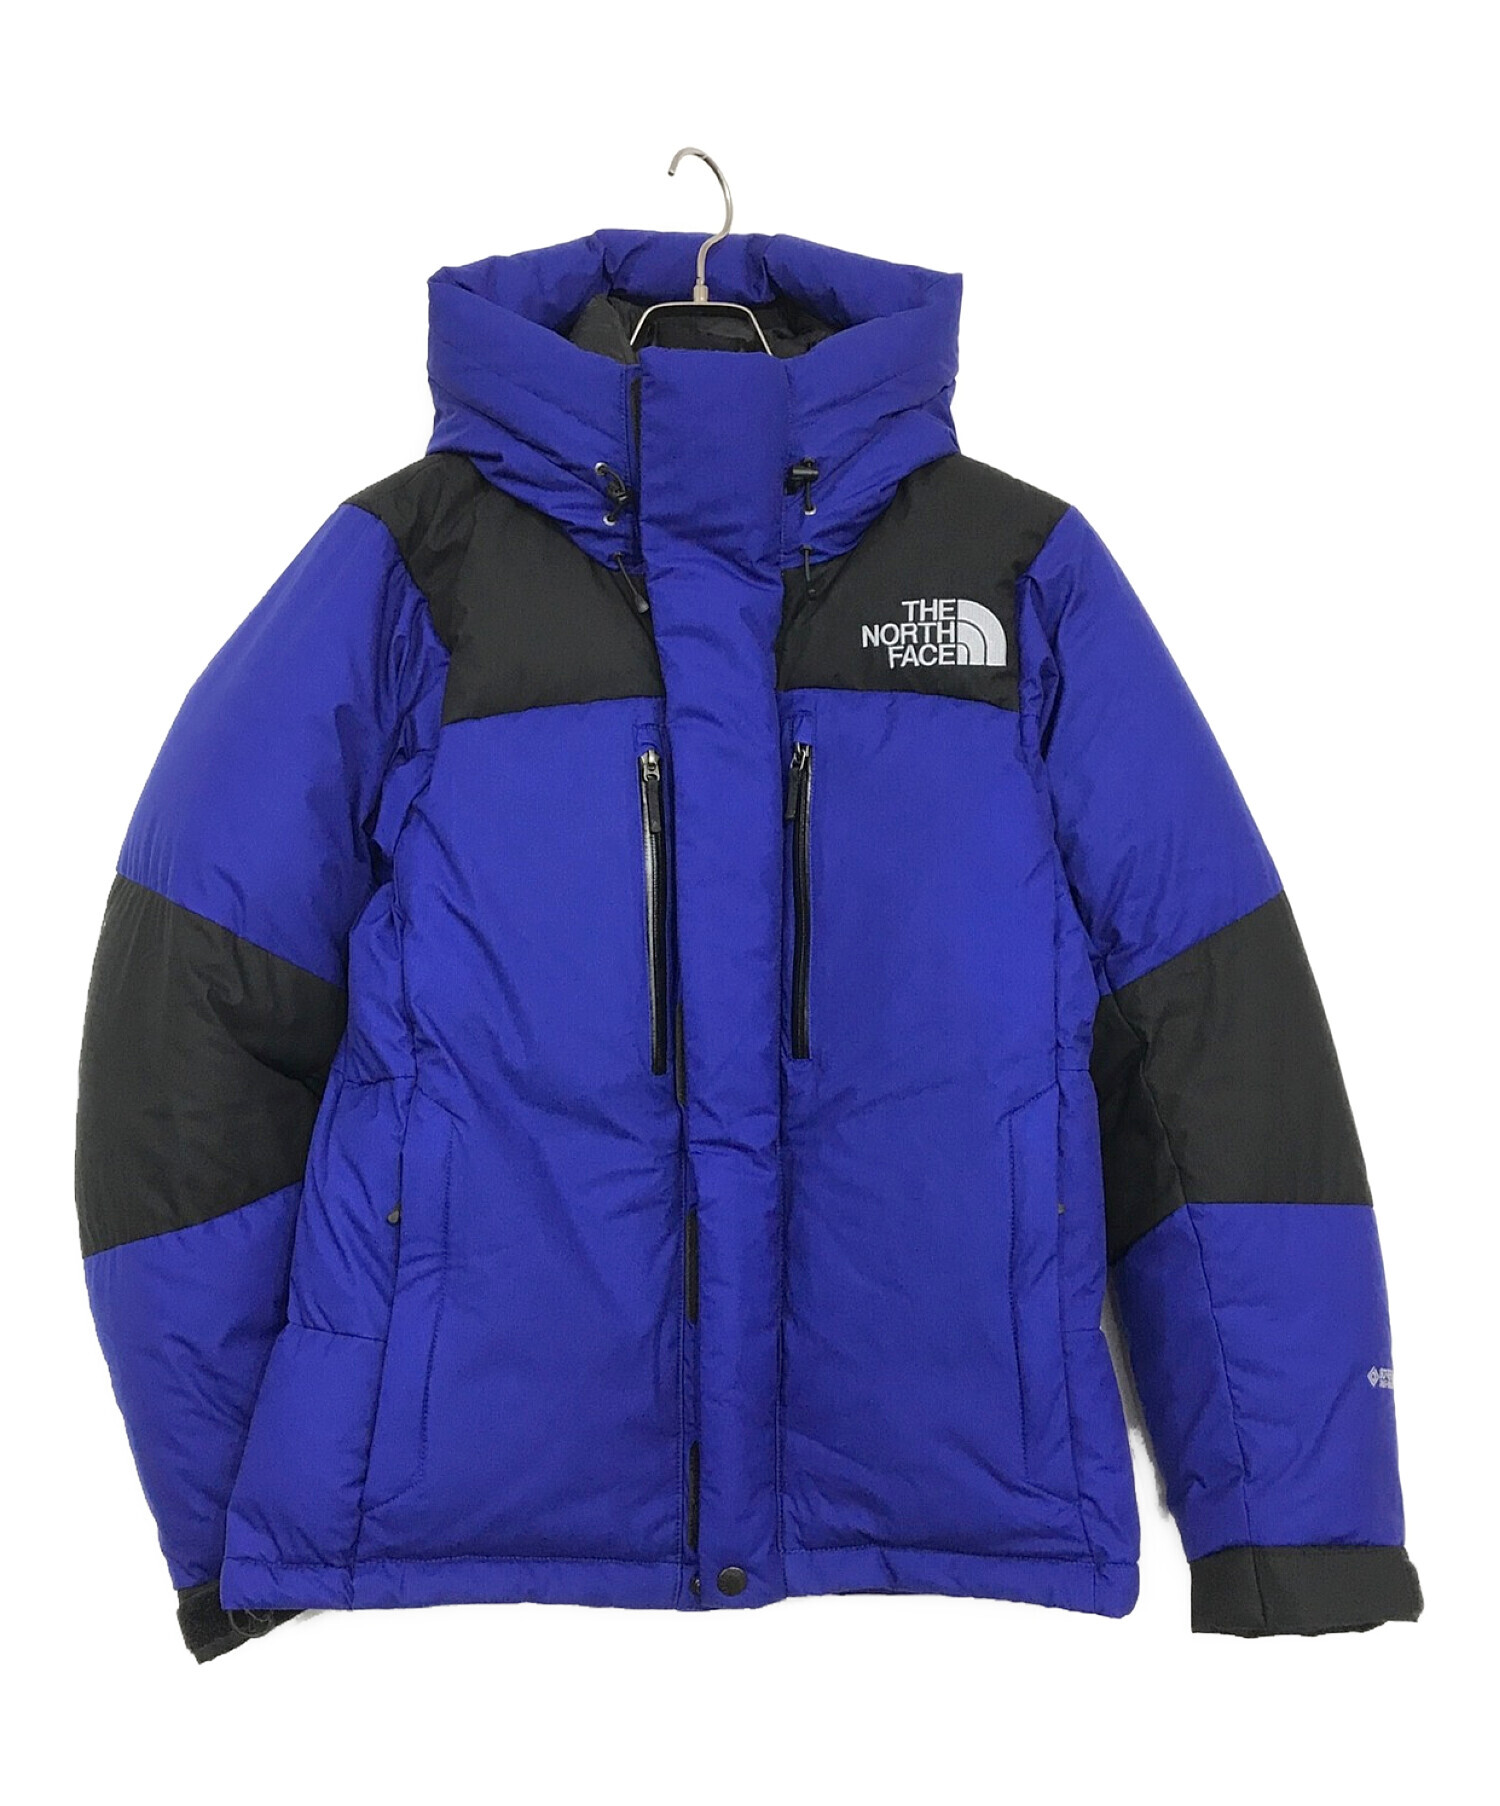 S The North Face Baltro Light Jacketメンズ